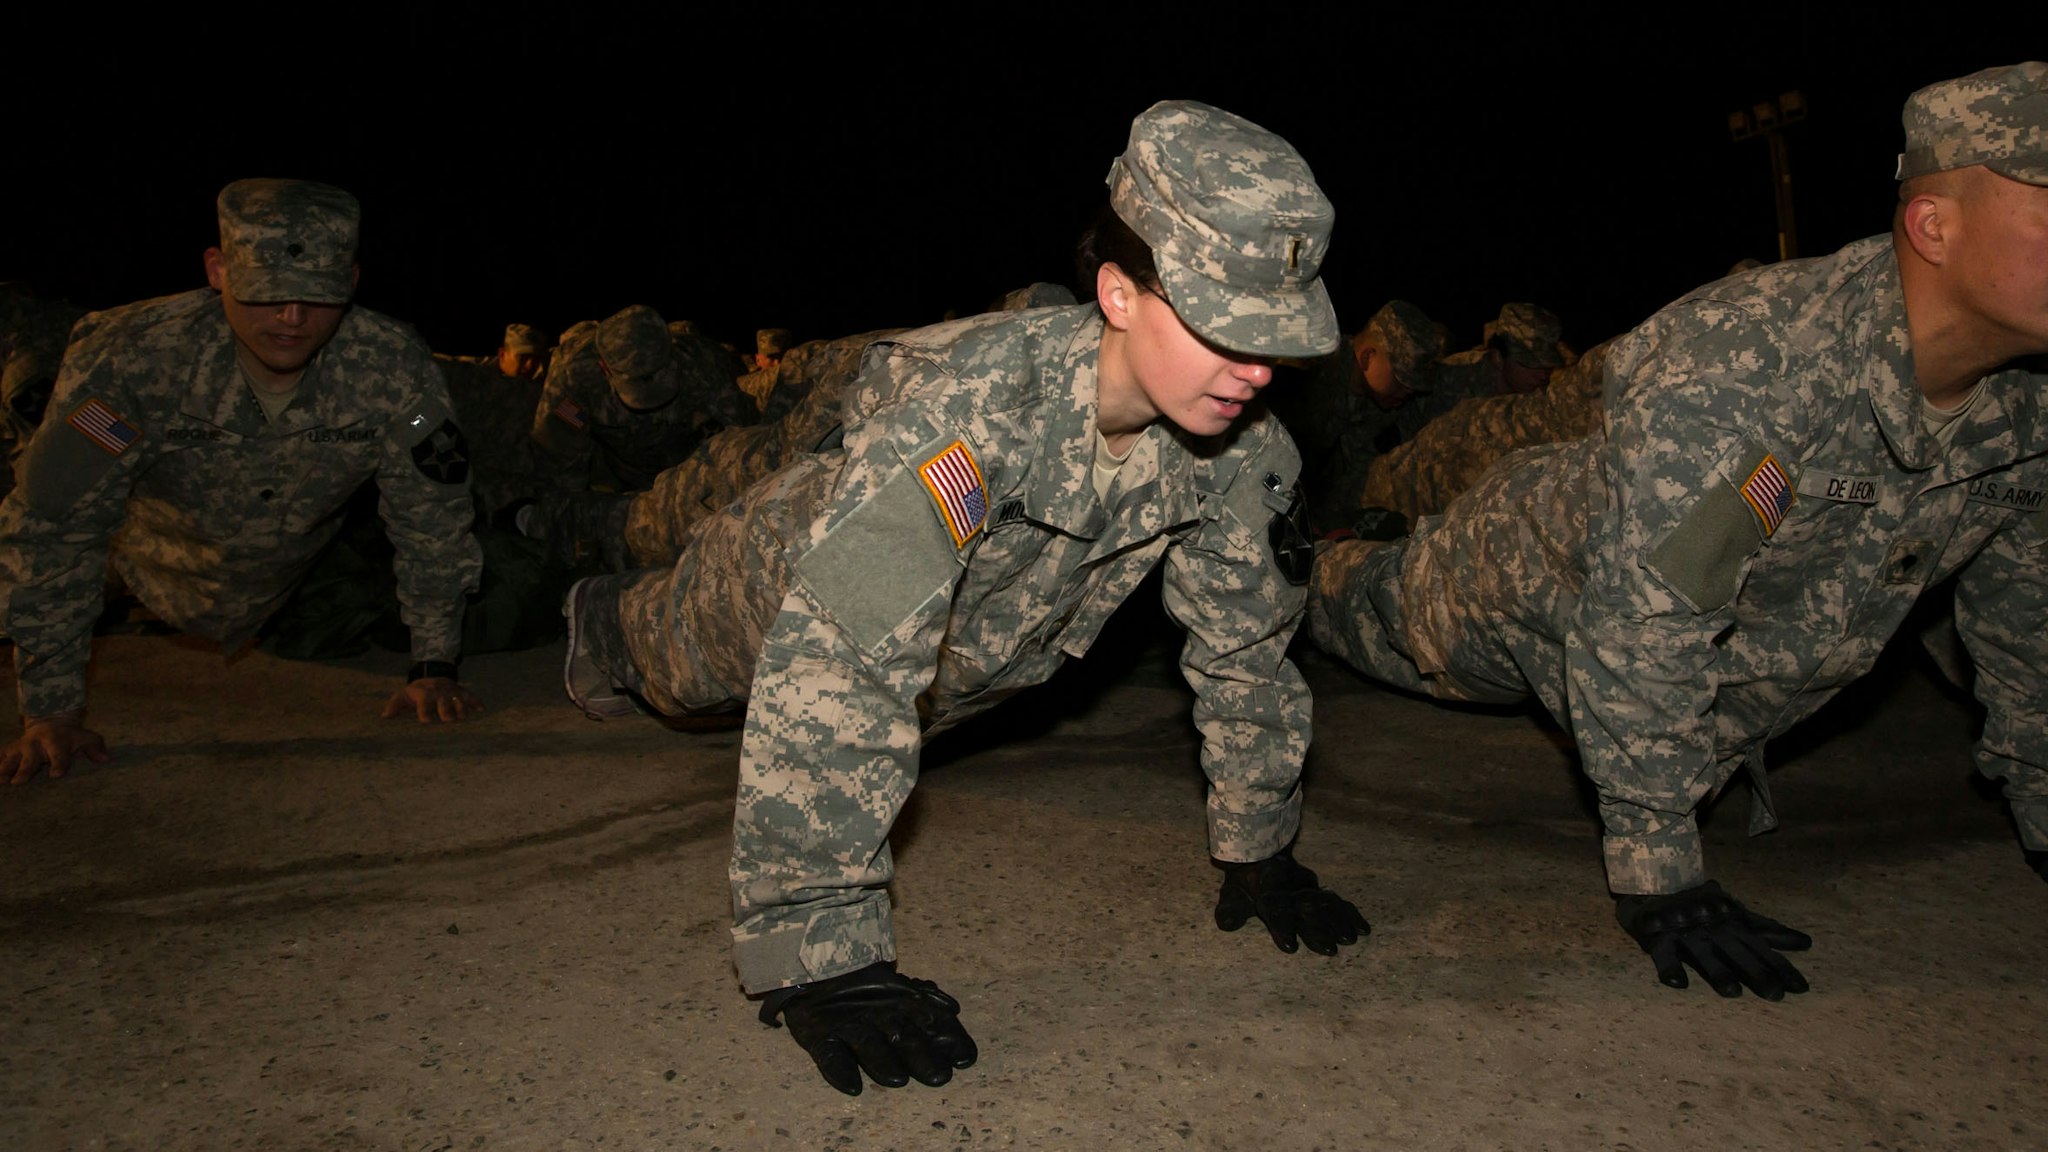 Soldiers with the U.S. Army's Second Infantry Division do push-ups during an air assault training course before dawn at Camp Casey in Dongducheon, South Korea, on Tuesday, Feb. 26, 2013. The U.S. has 28,500 soldiers in South Korea as a legacy of the 1950-53 Korean War, which ended in a cease-fire that left the two Koreas technically still at war.